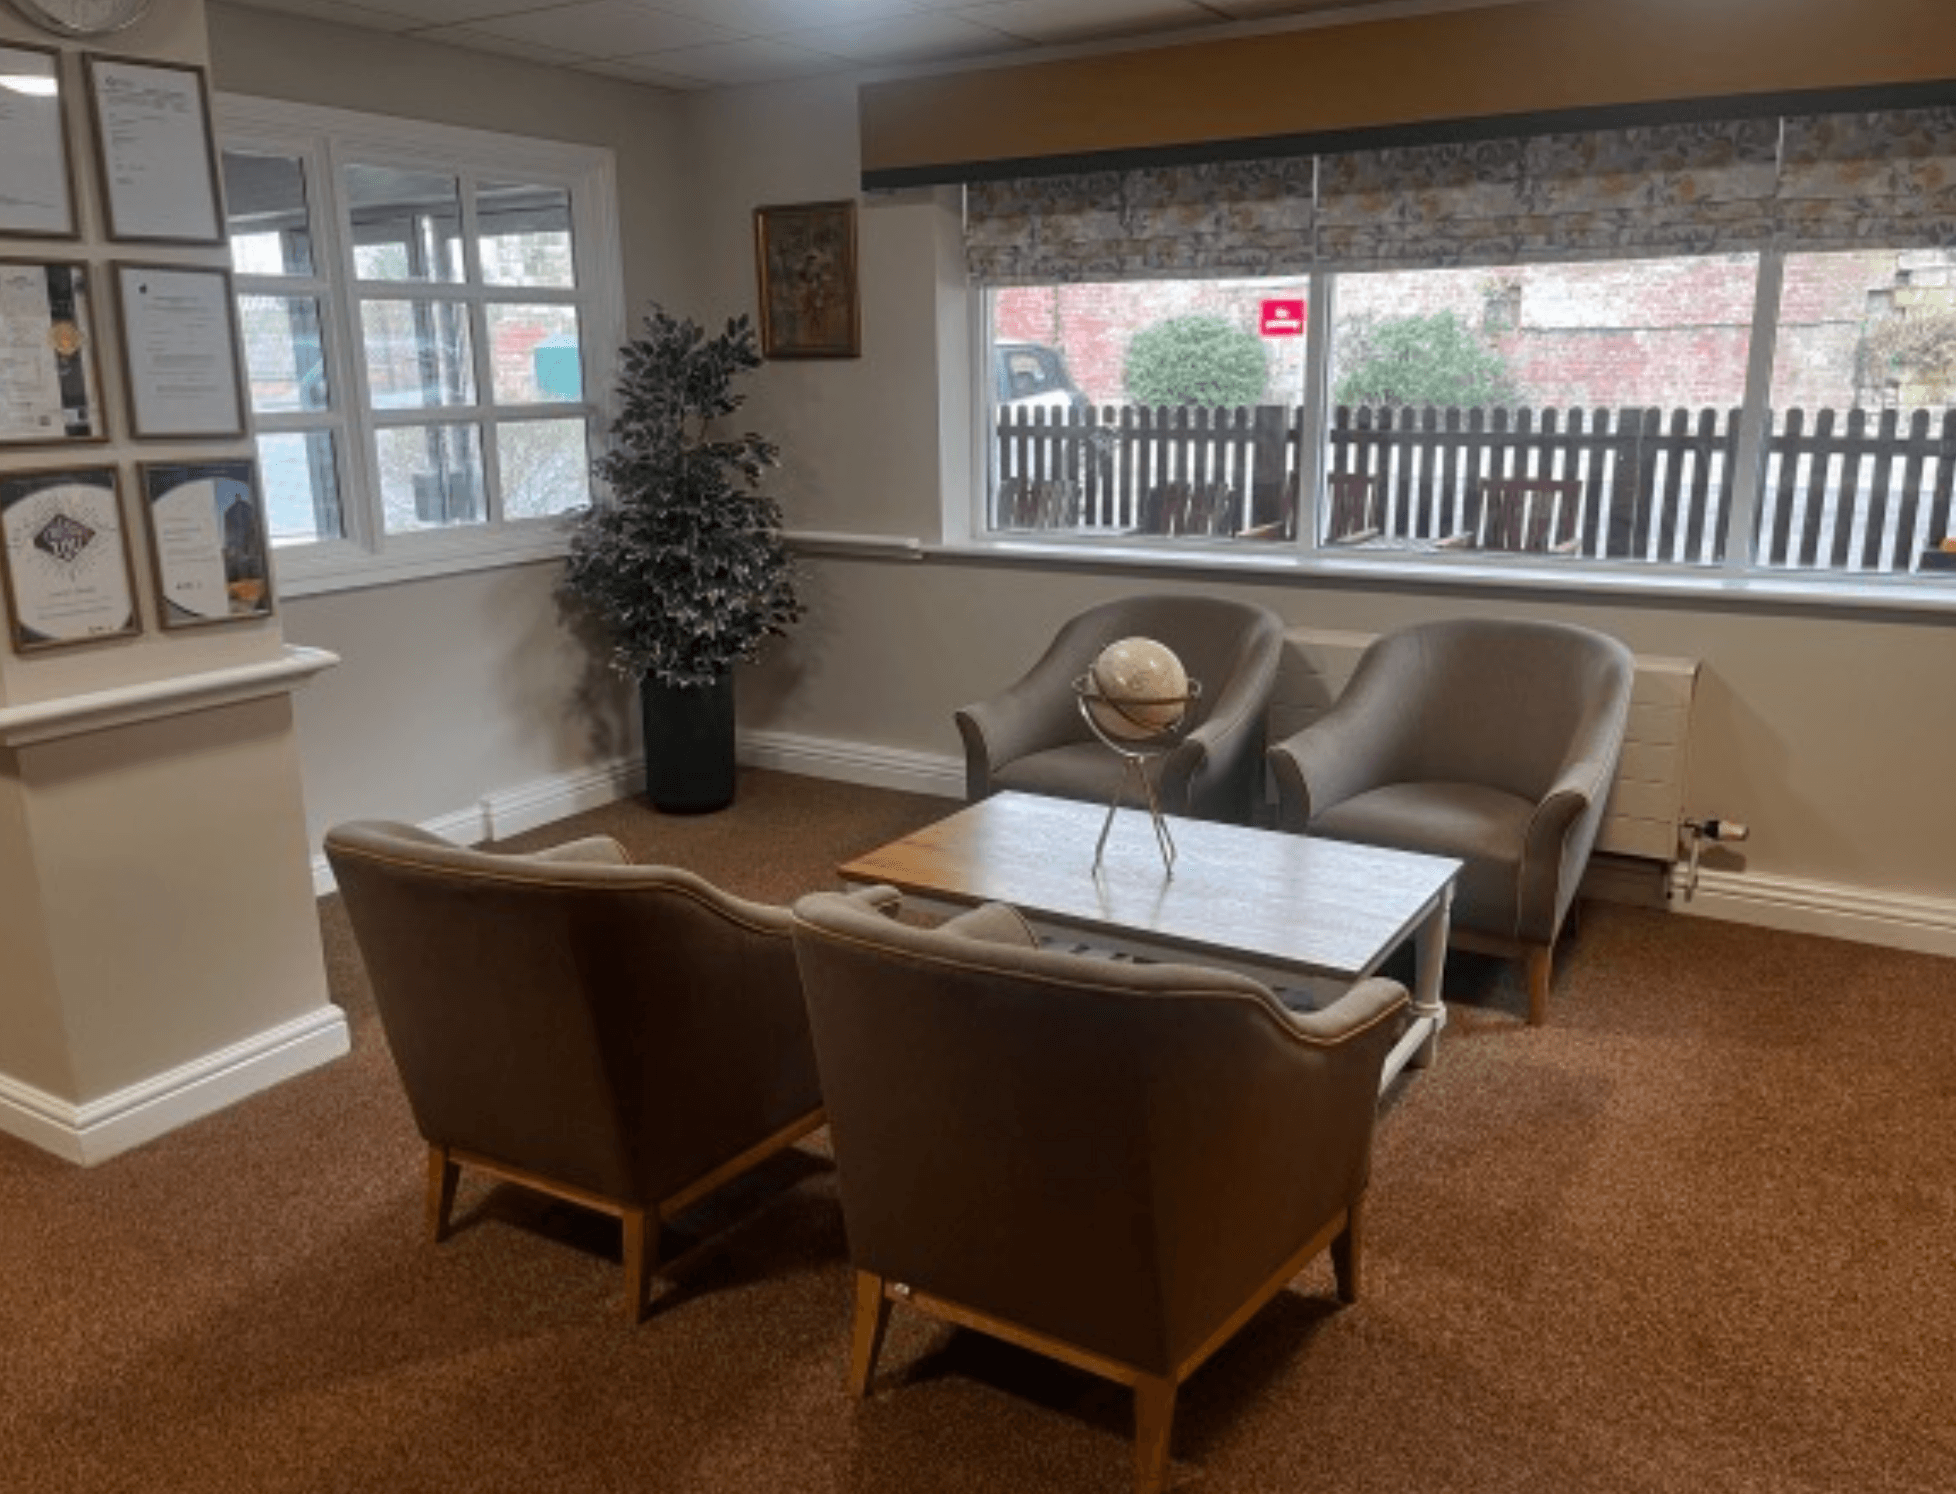 Lounge of Moorgate Croft care home in Rotherham